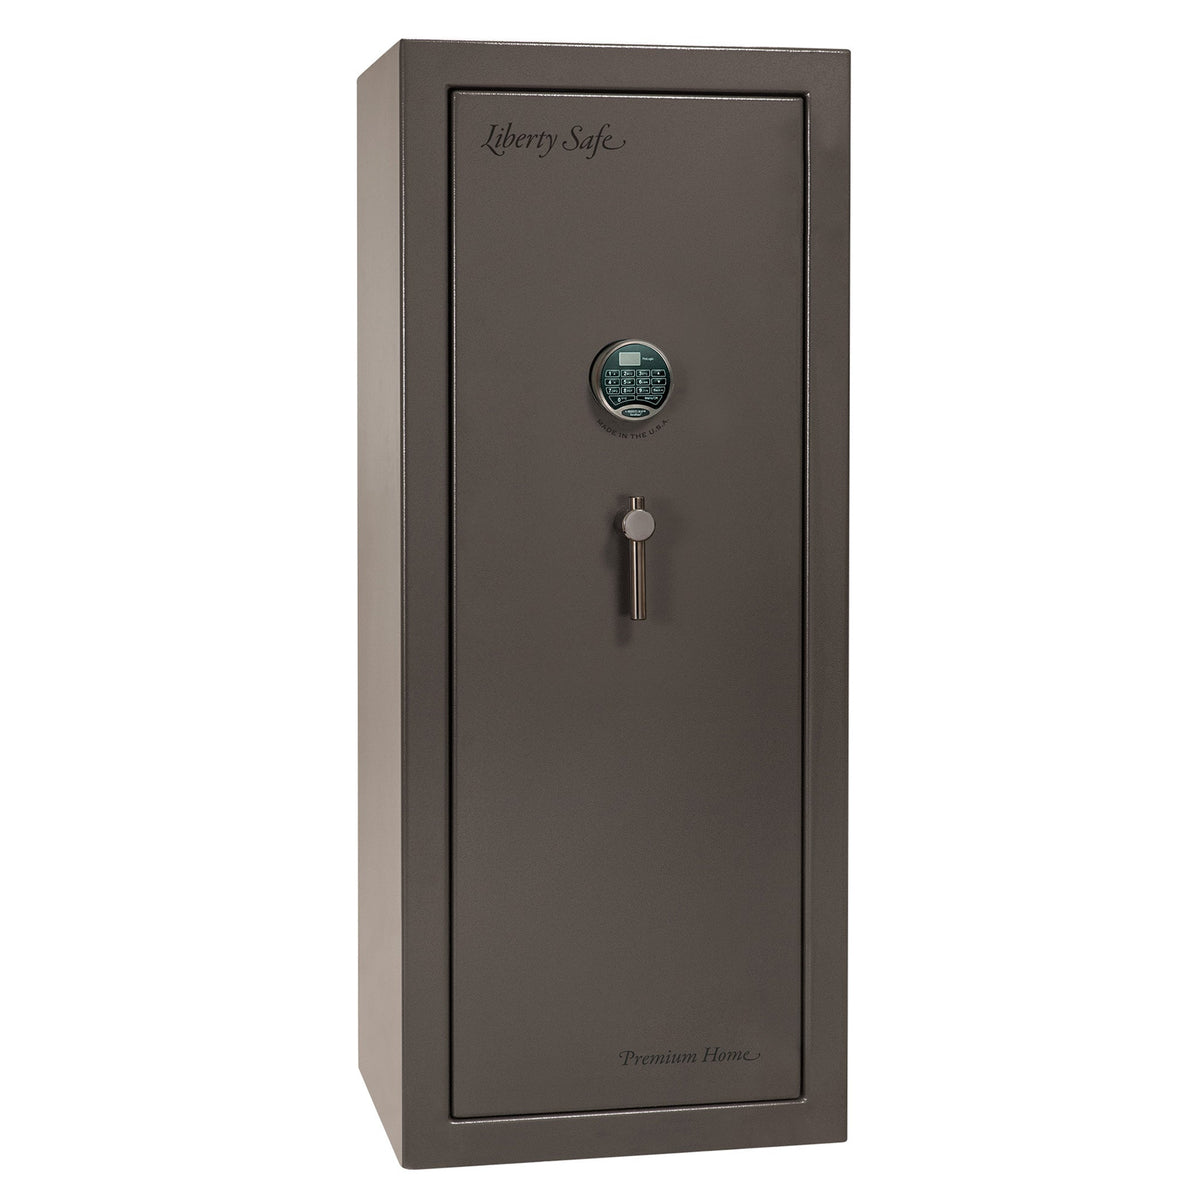 Premium Home Series | Level 7 Security | 2 Hour Fire Protection | 17 | Dimensions: 60.25&quot;(H) x 24.5&quot;(W) x 19&quot;(D) | Gray Marble - Closed Door